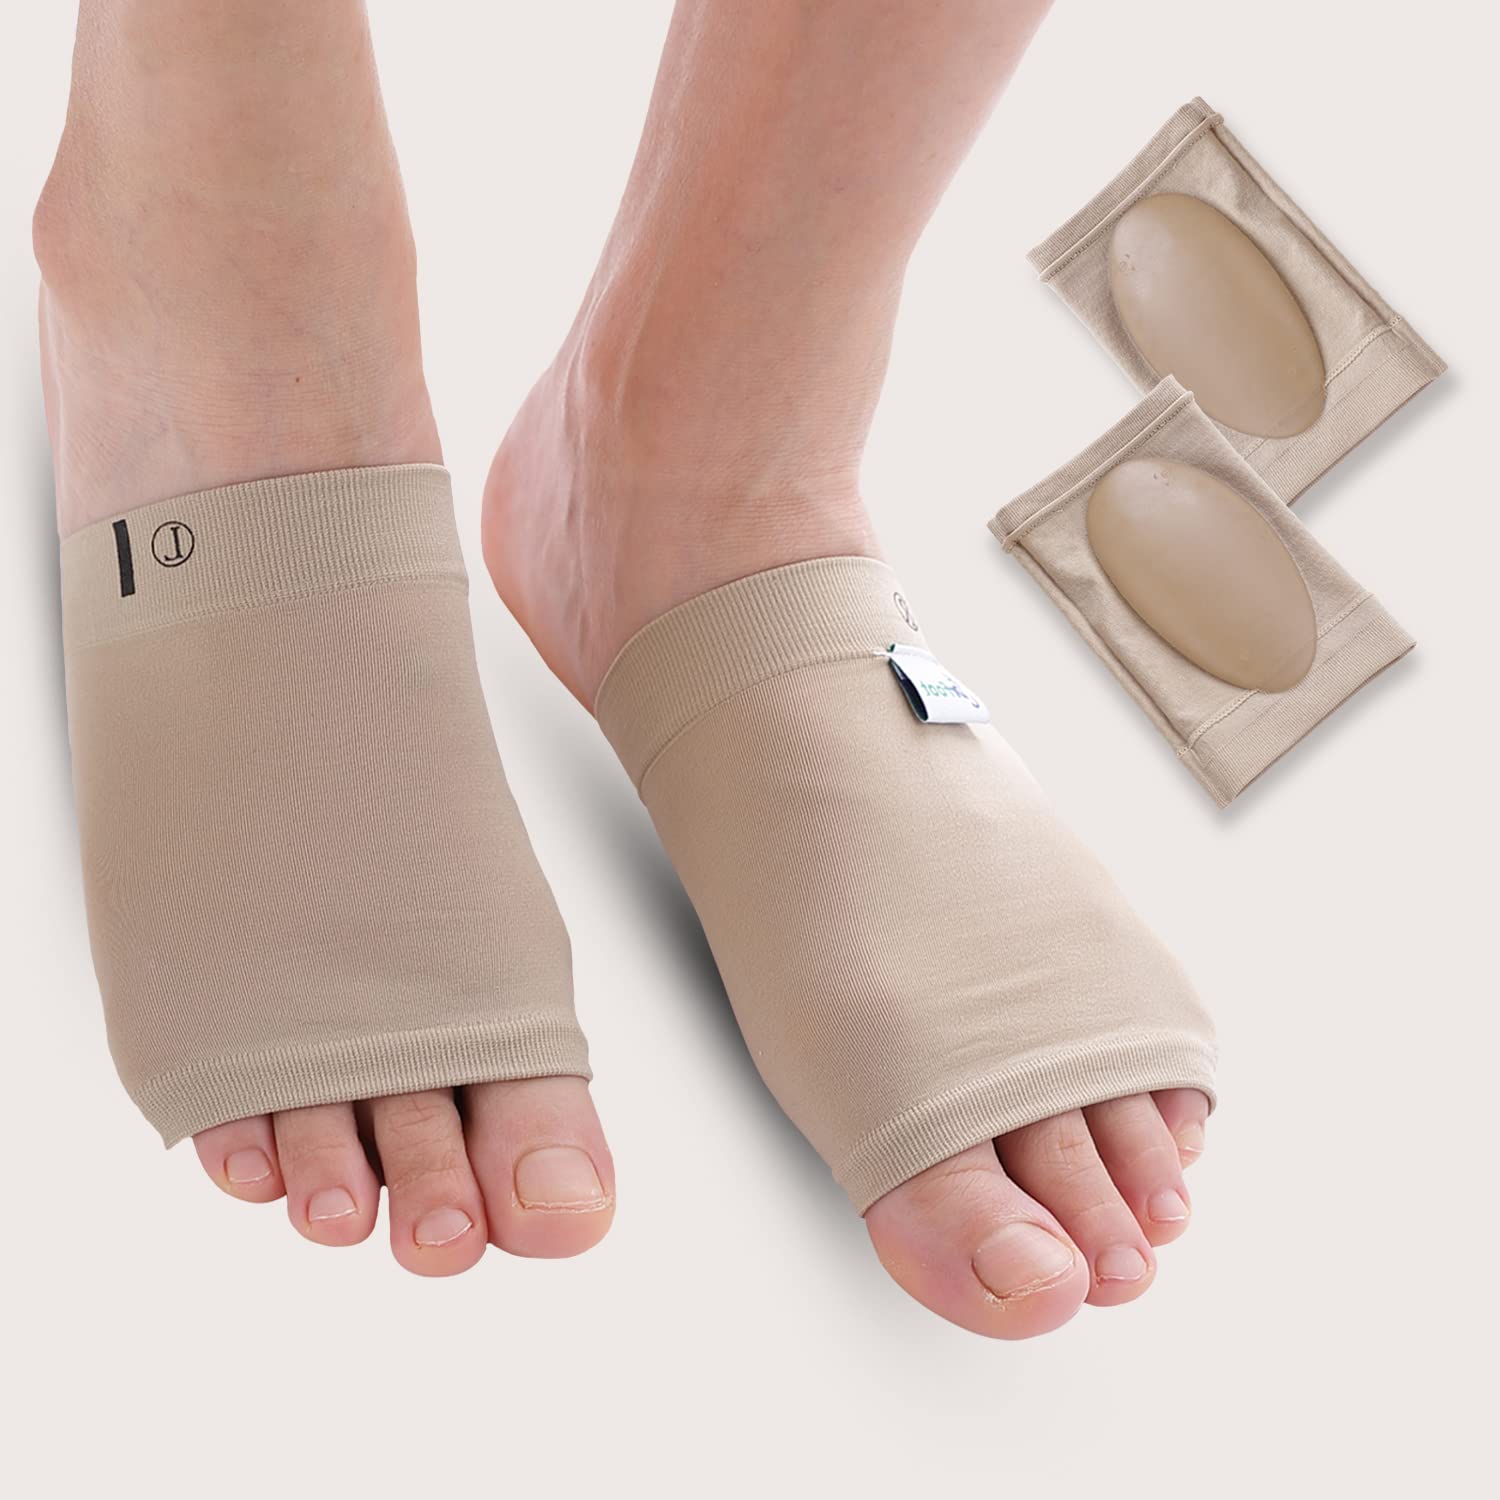 Dr Foot Arch Support Sleeve Cushion | For Plantar Fasciitis, Foot Pain, Muscle Relaxation, Fallen Arches | For Men & Women | Free Size With Beige Color -1 Pair (Pack of 5)